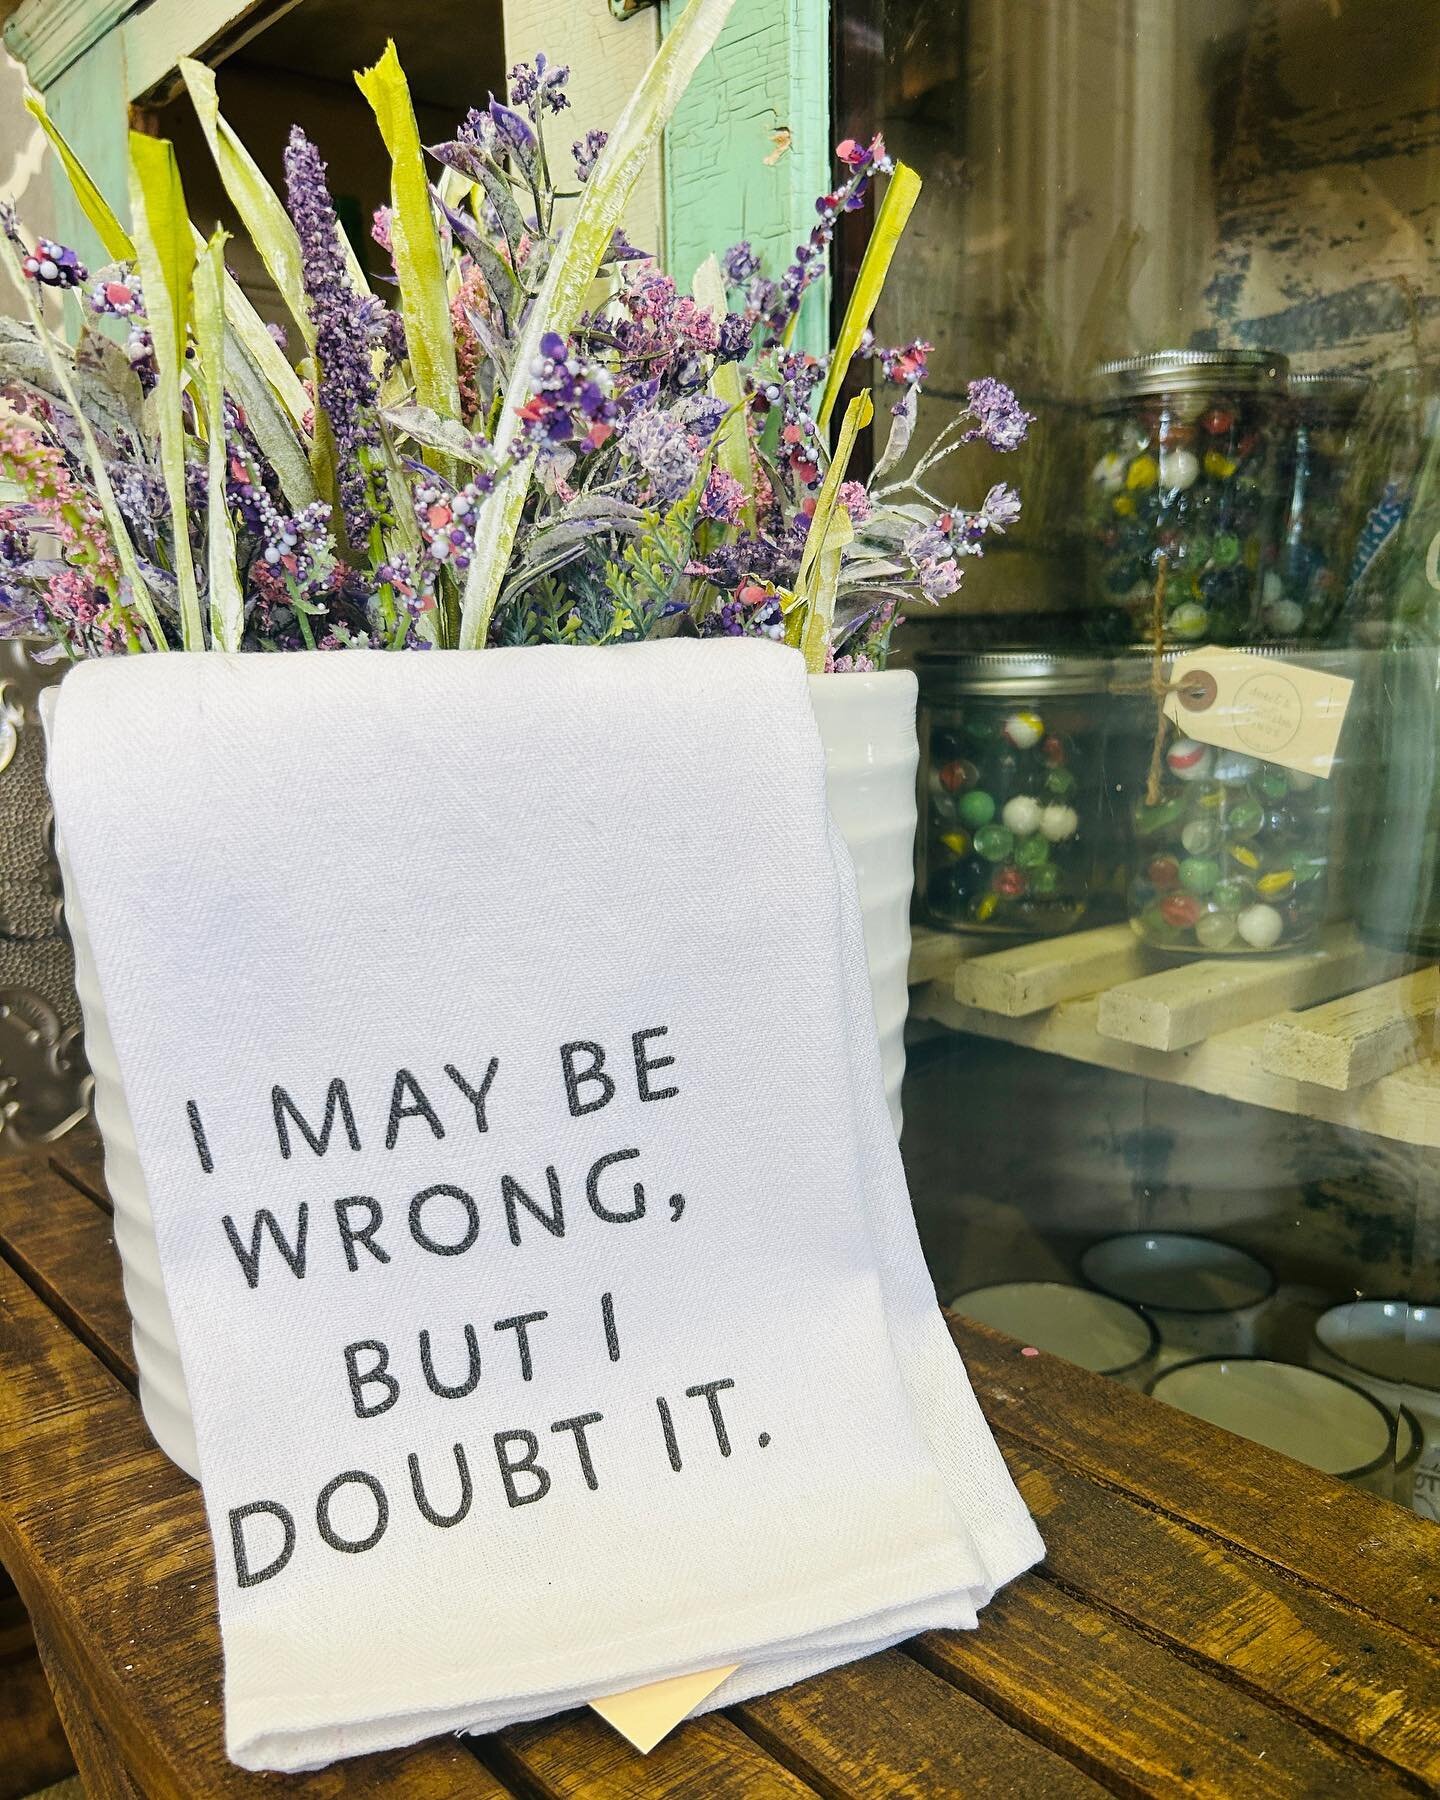 Love a good tea towel! 🤍
.
.
#farmhouseliving #homelovers #ilovemyhome #farmhousedecorating #farmhousetable #fixerupperstyle #sweetandsouthernfinds #aliltownalottalove #shopsmallbusiness #taylortx #homedesign #farmhouselove #homelove #loveyourhome #